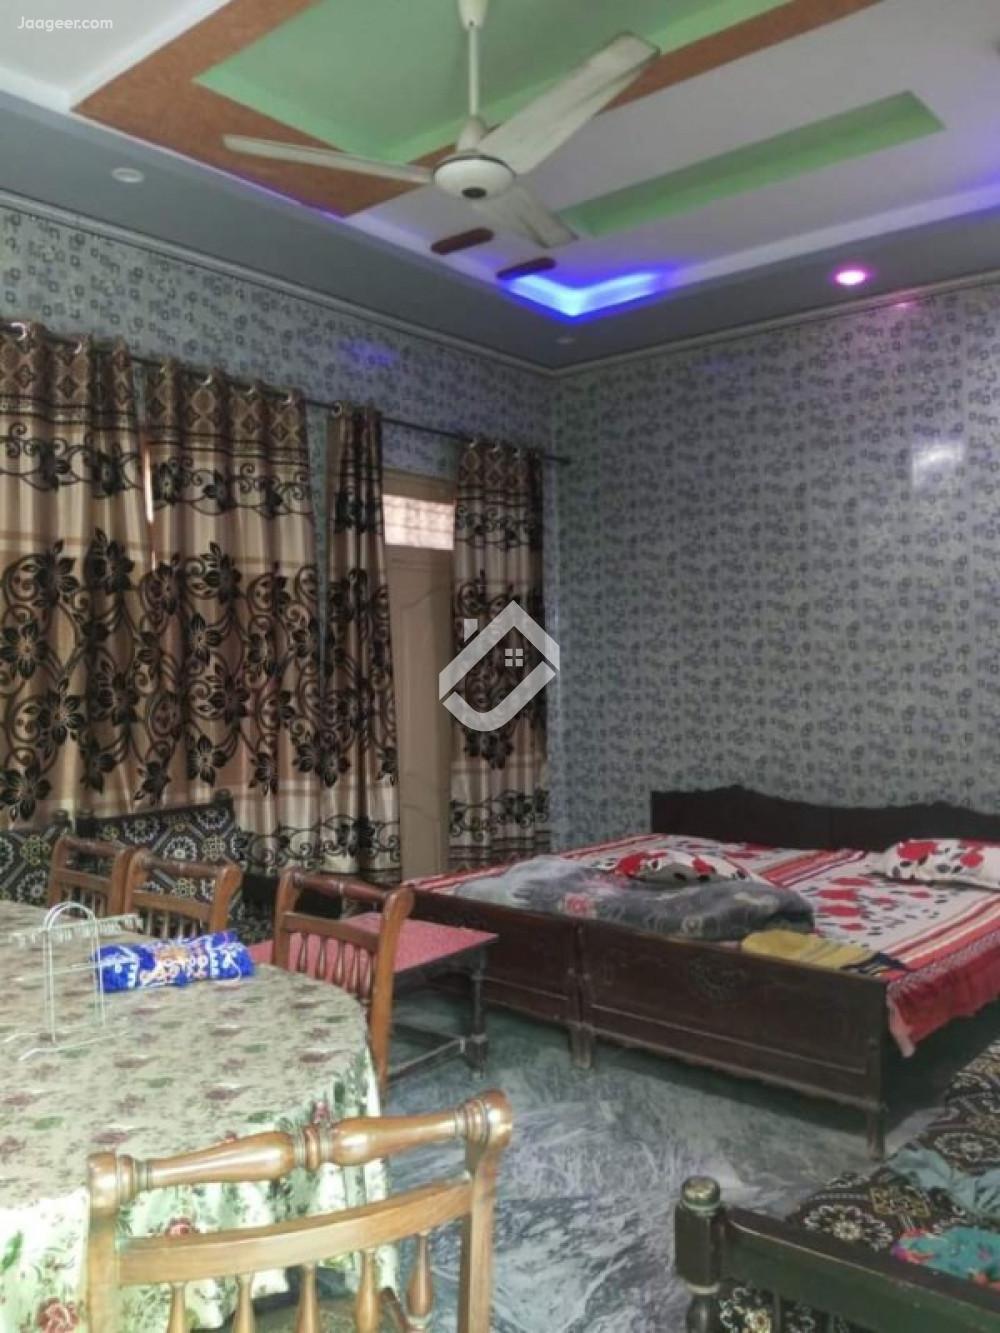 Main image 5 Marla House For Sale In Bashir Colony Old Satellite Town 9 No. Chungi Link Canal Road Sargodha 